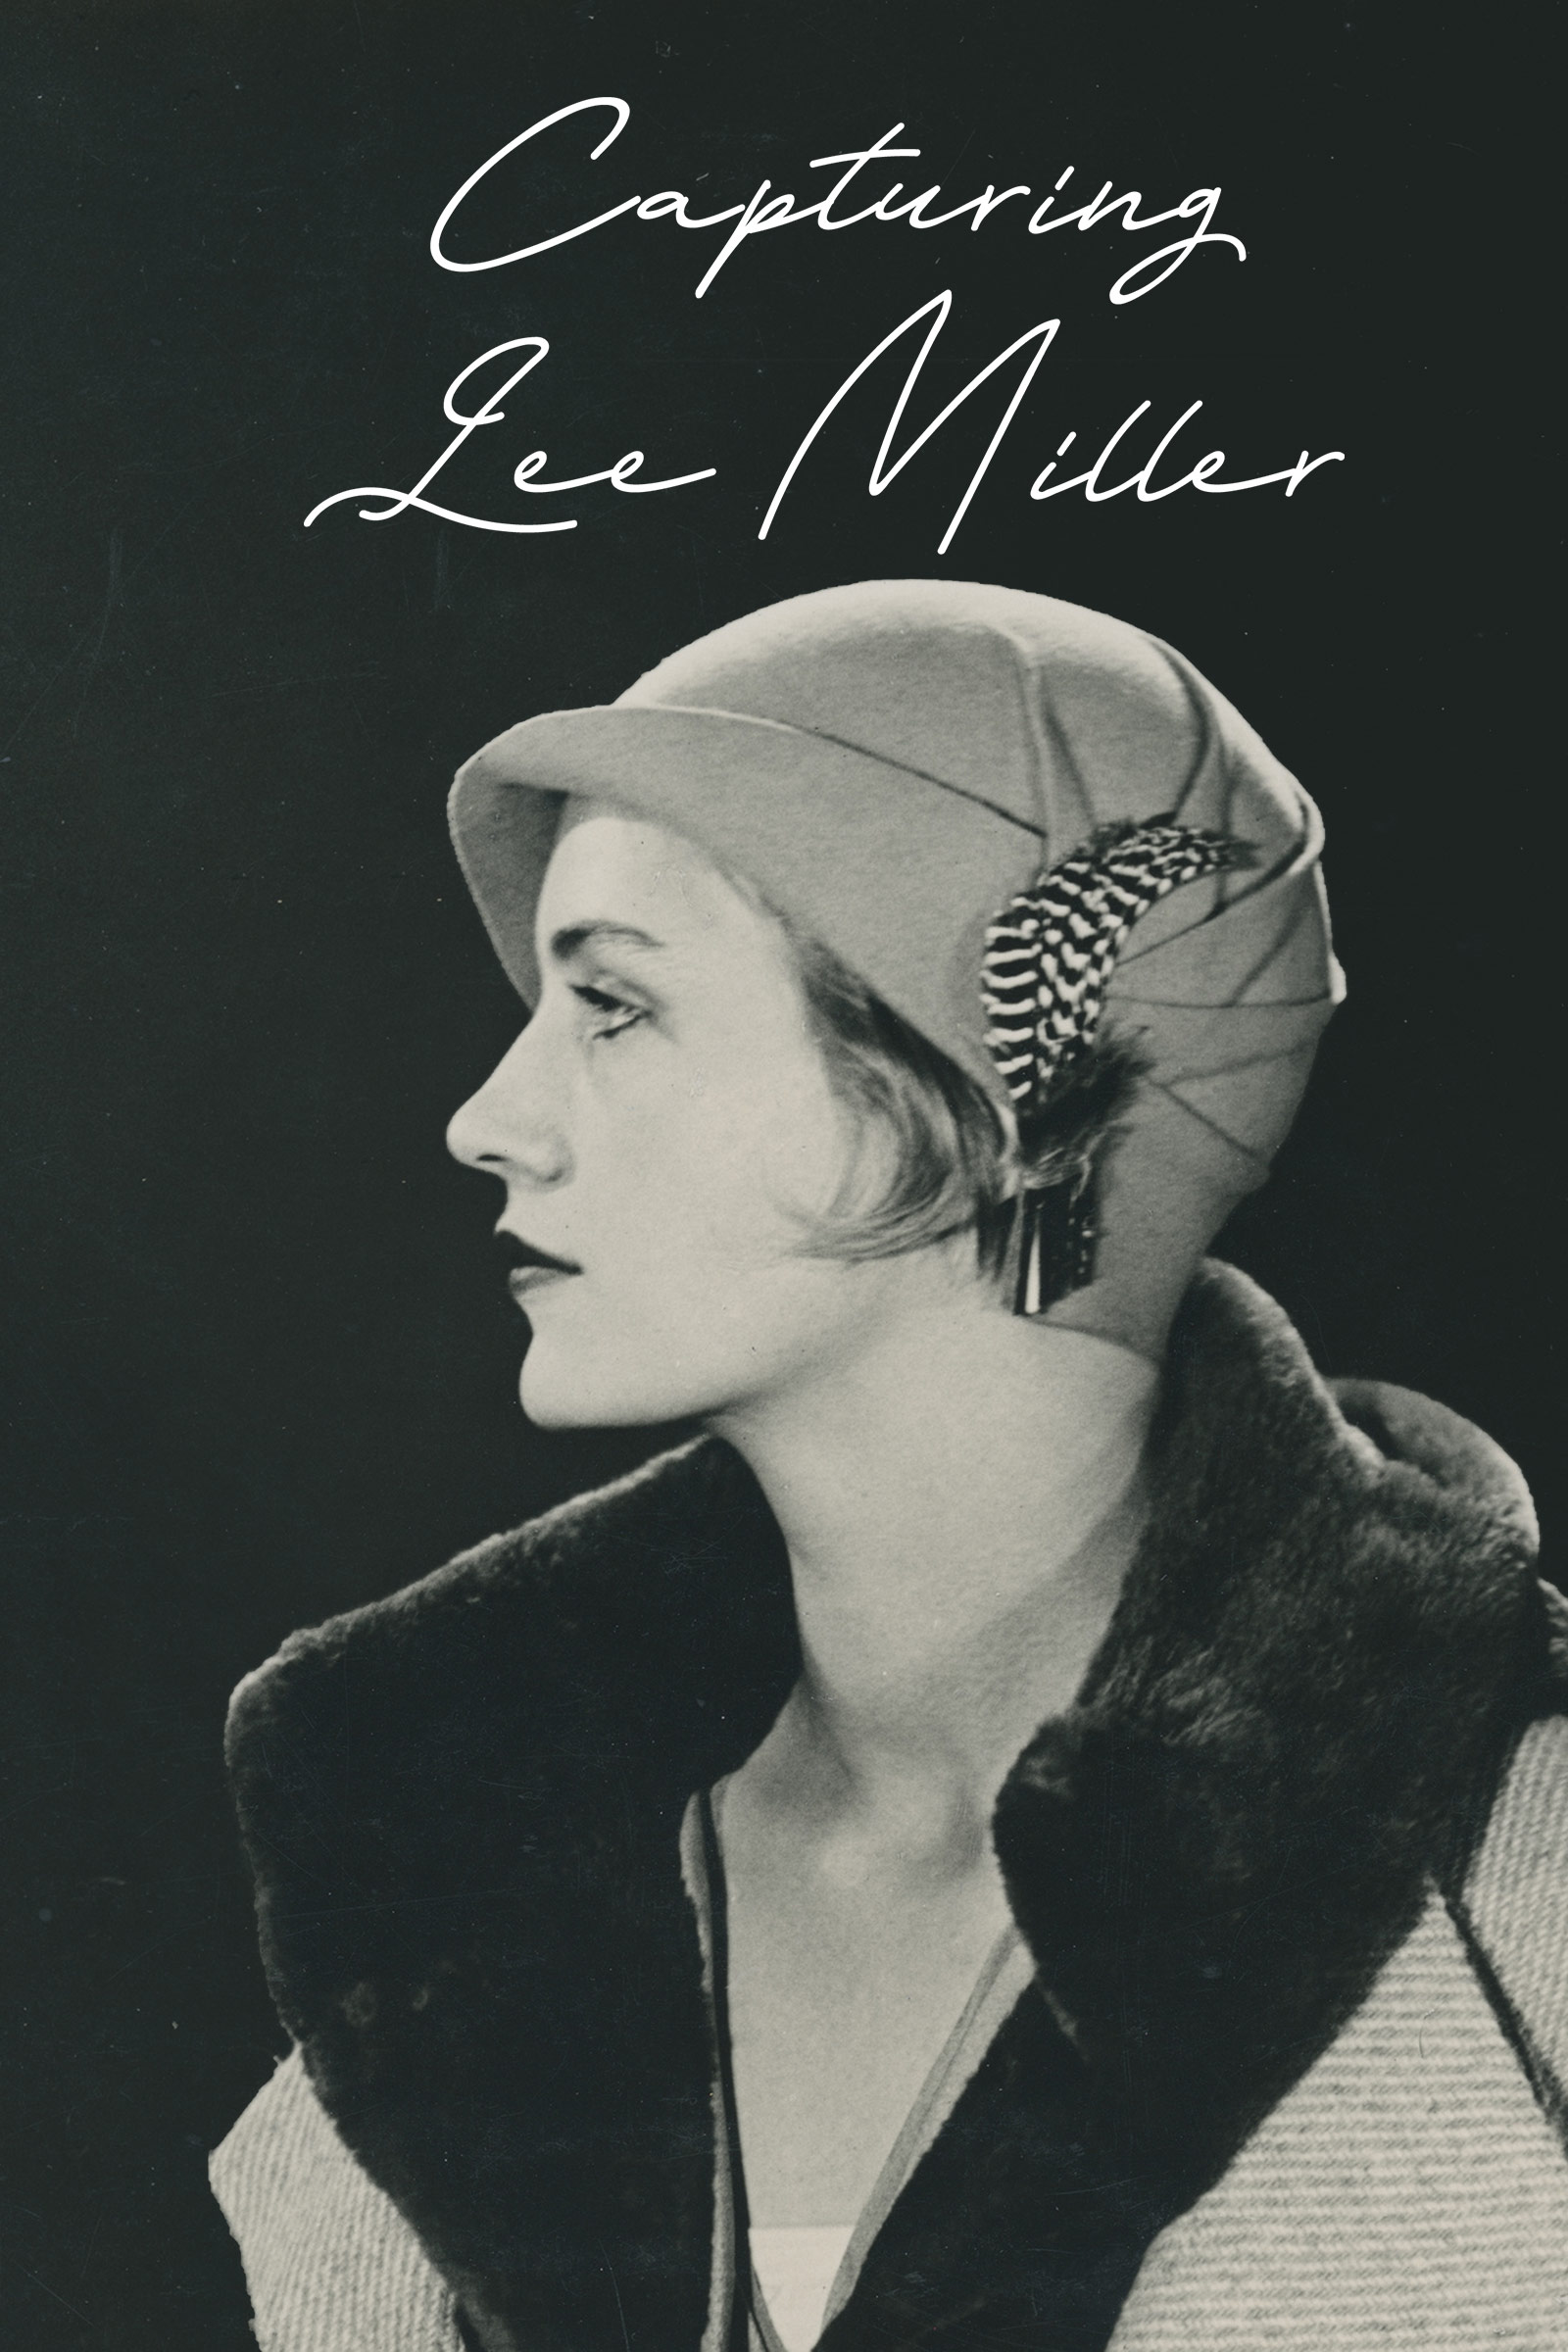 Where to stream Capturing Lee Miller